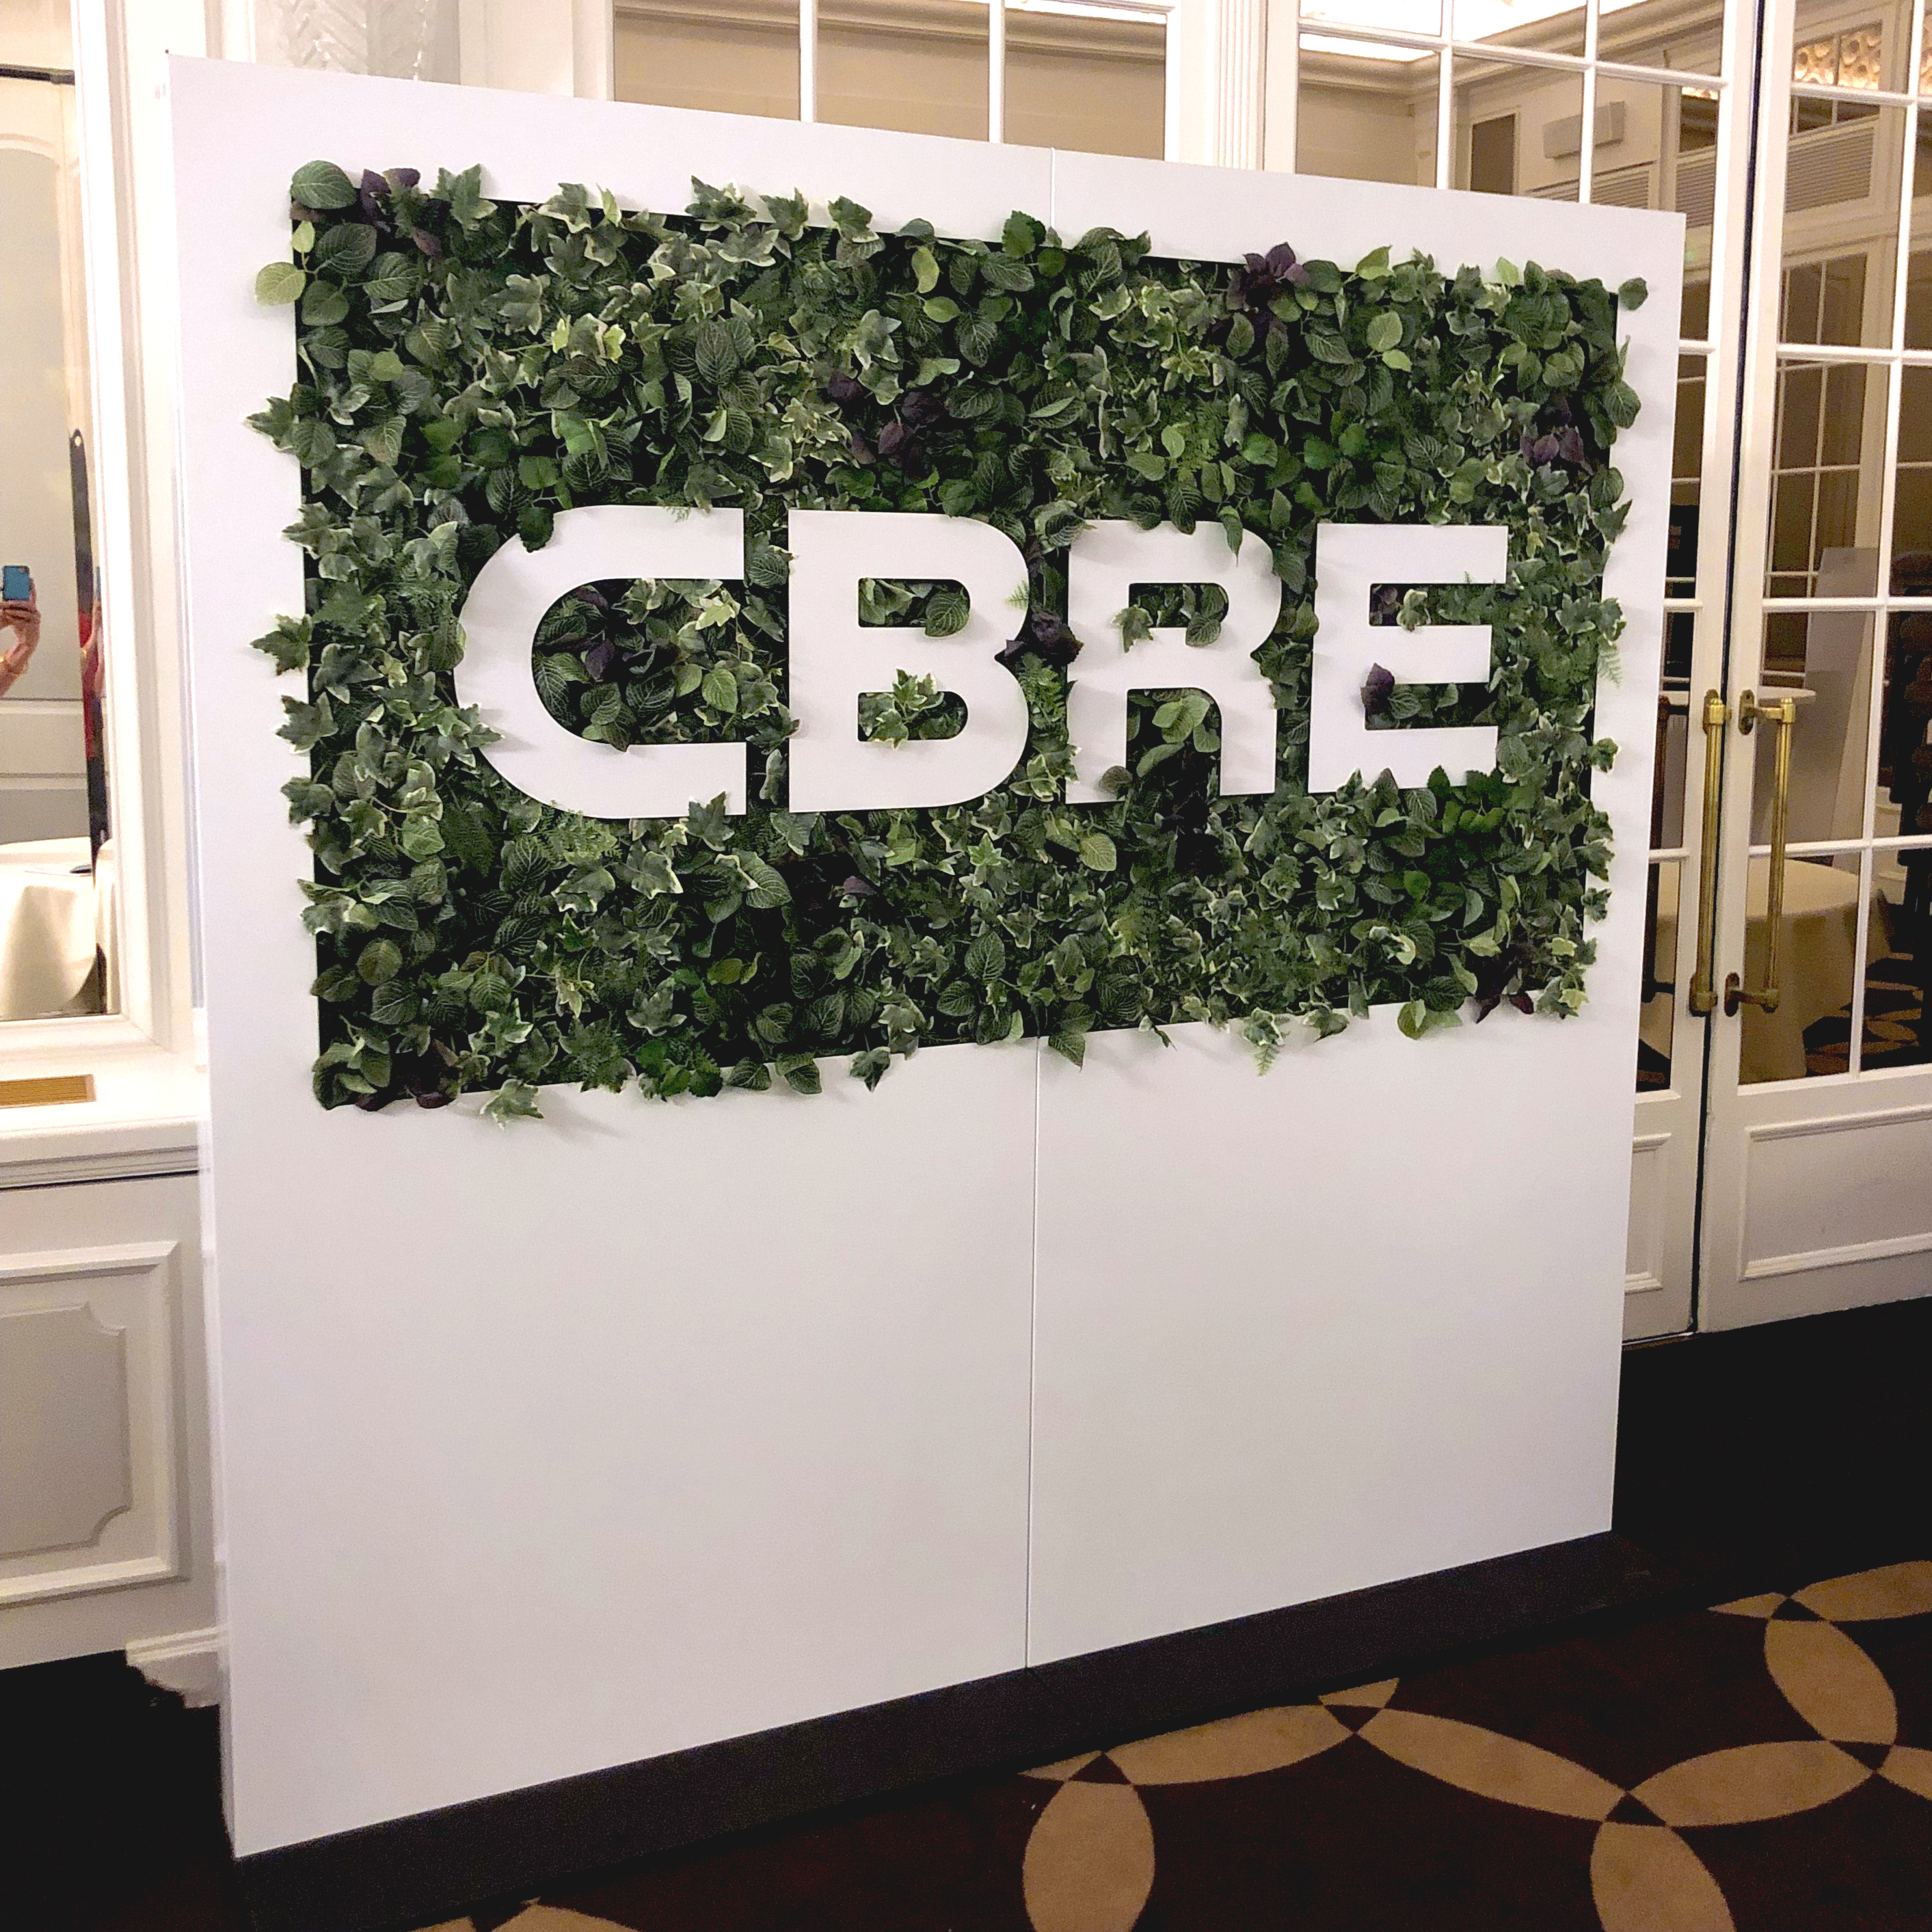 Tailor made "Green Wall" for Real Estate company CBRE